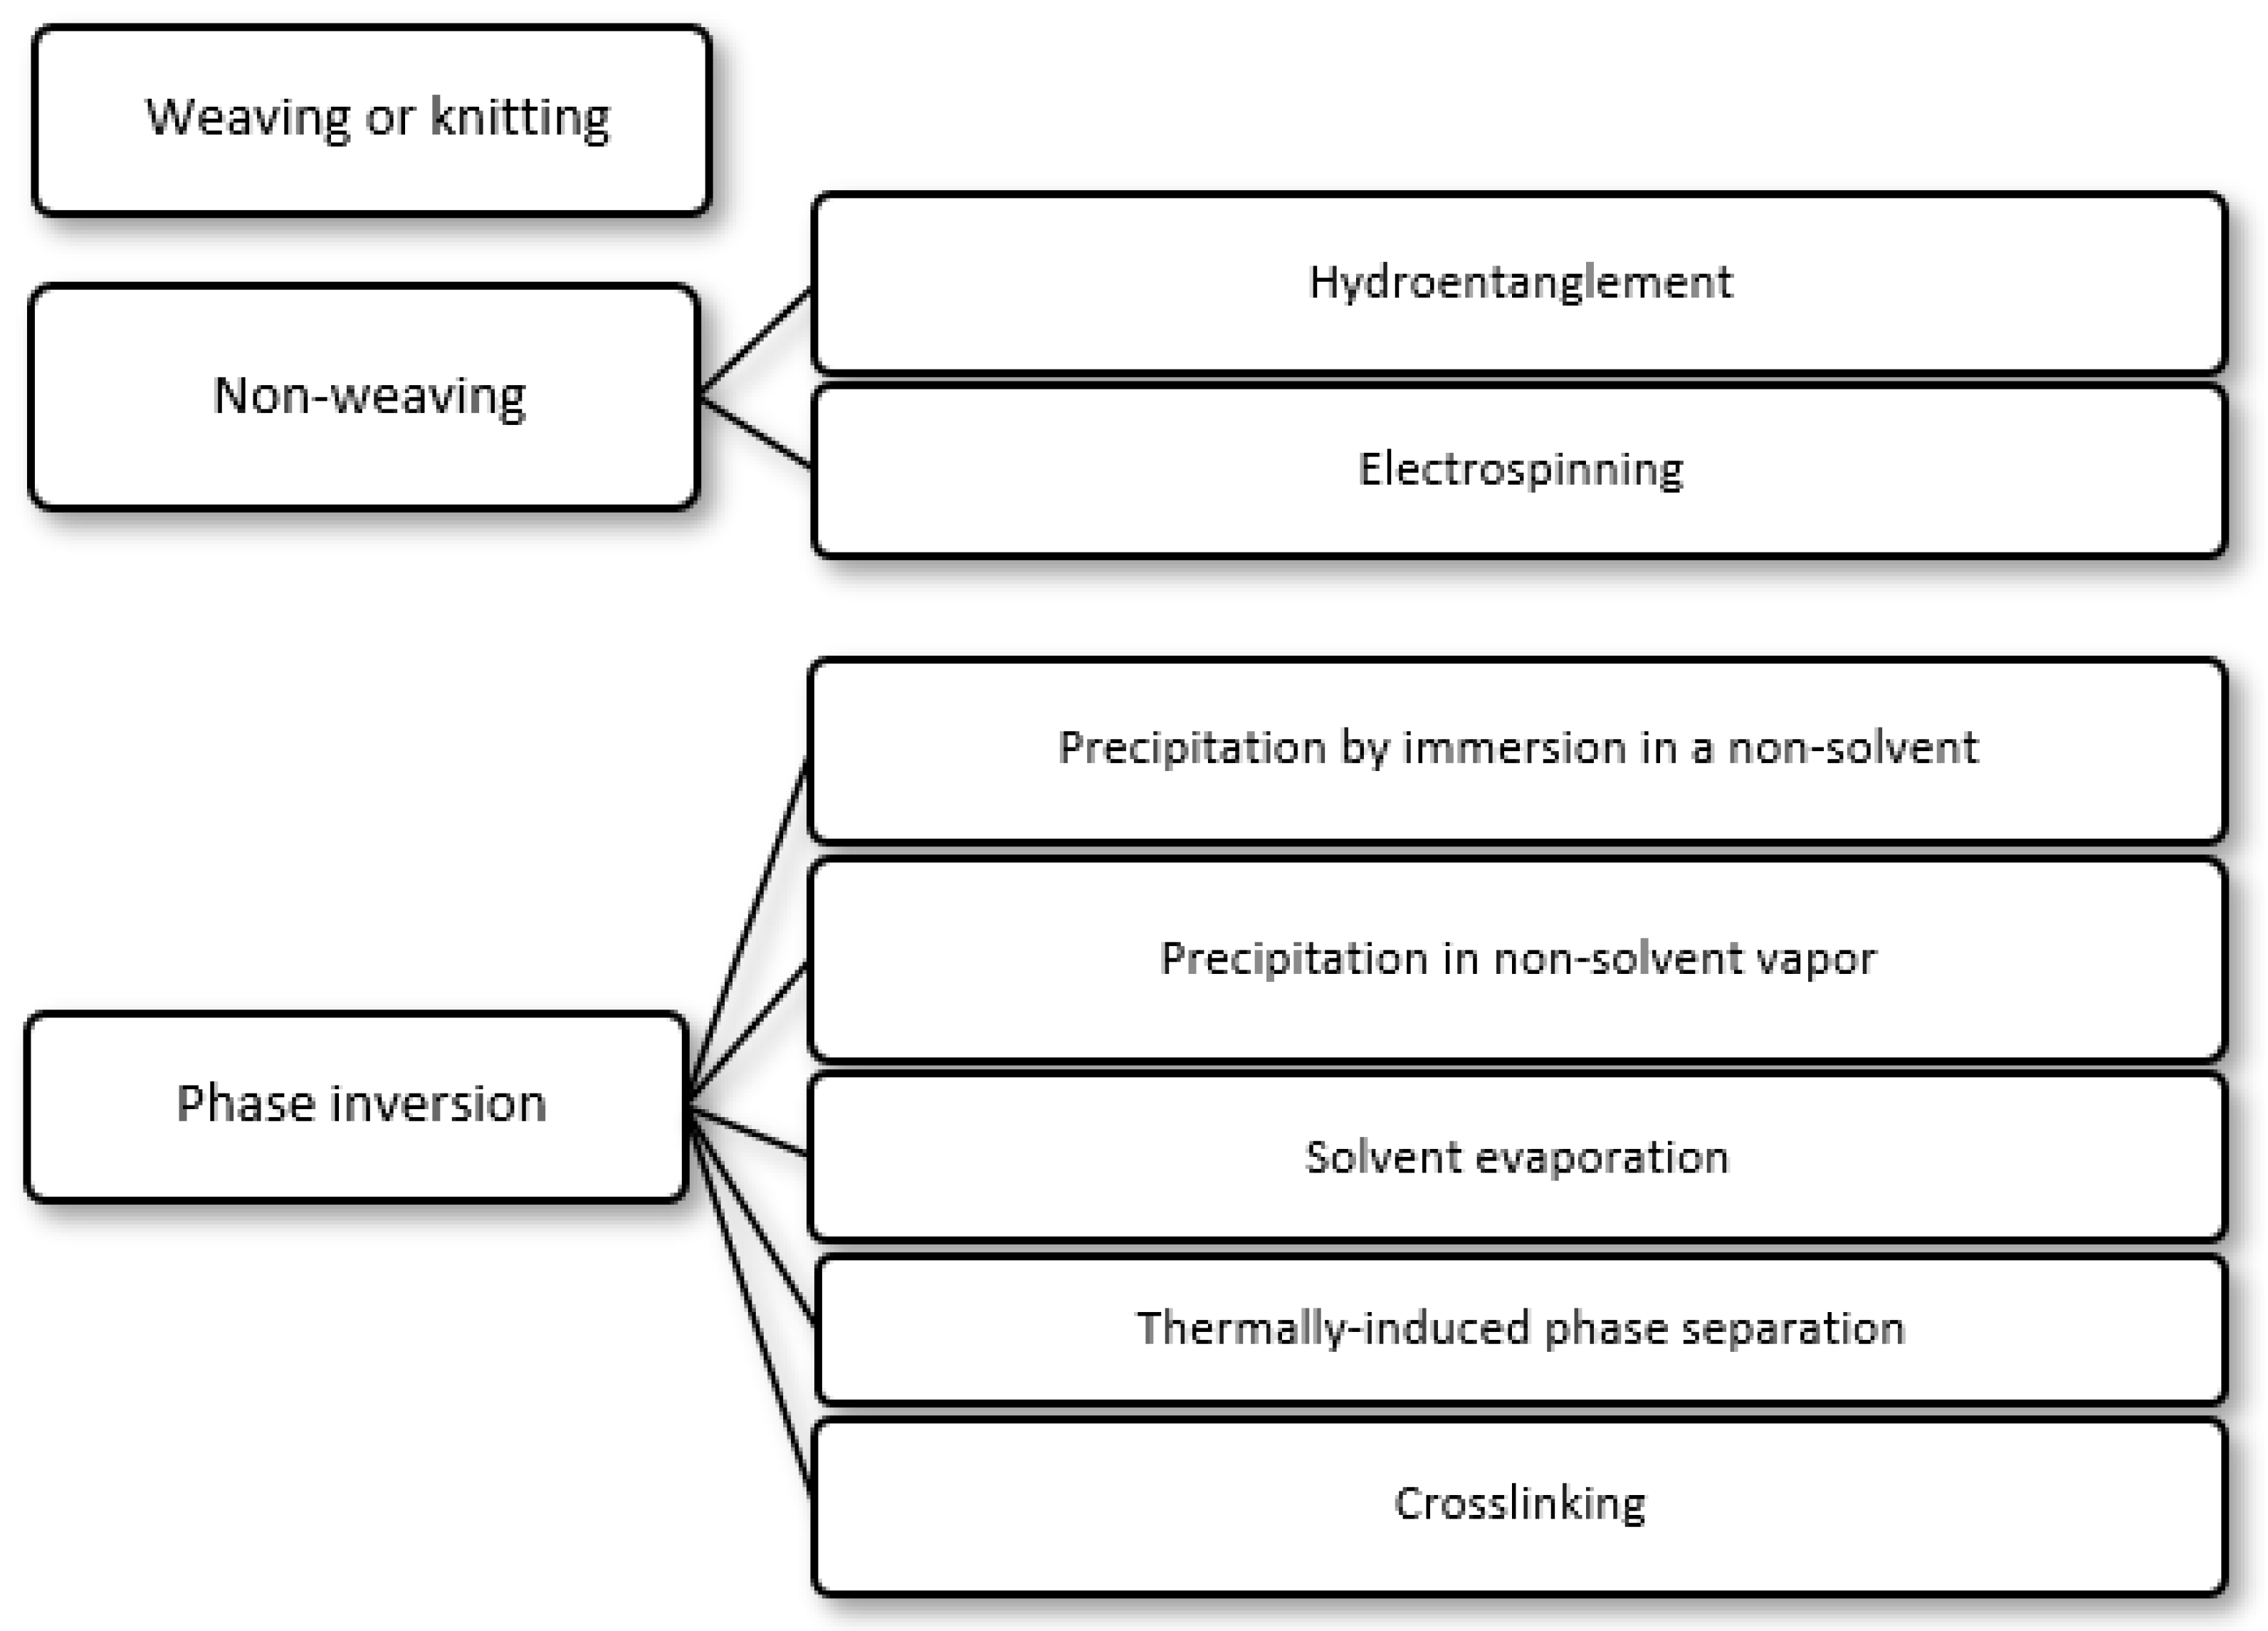 PDF) Acute surgical wound‐dressing procedure: Description of the steps  involved in the development and validation of an observational metric